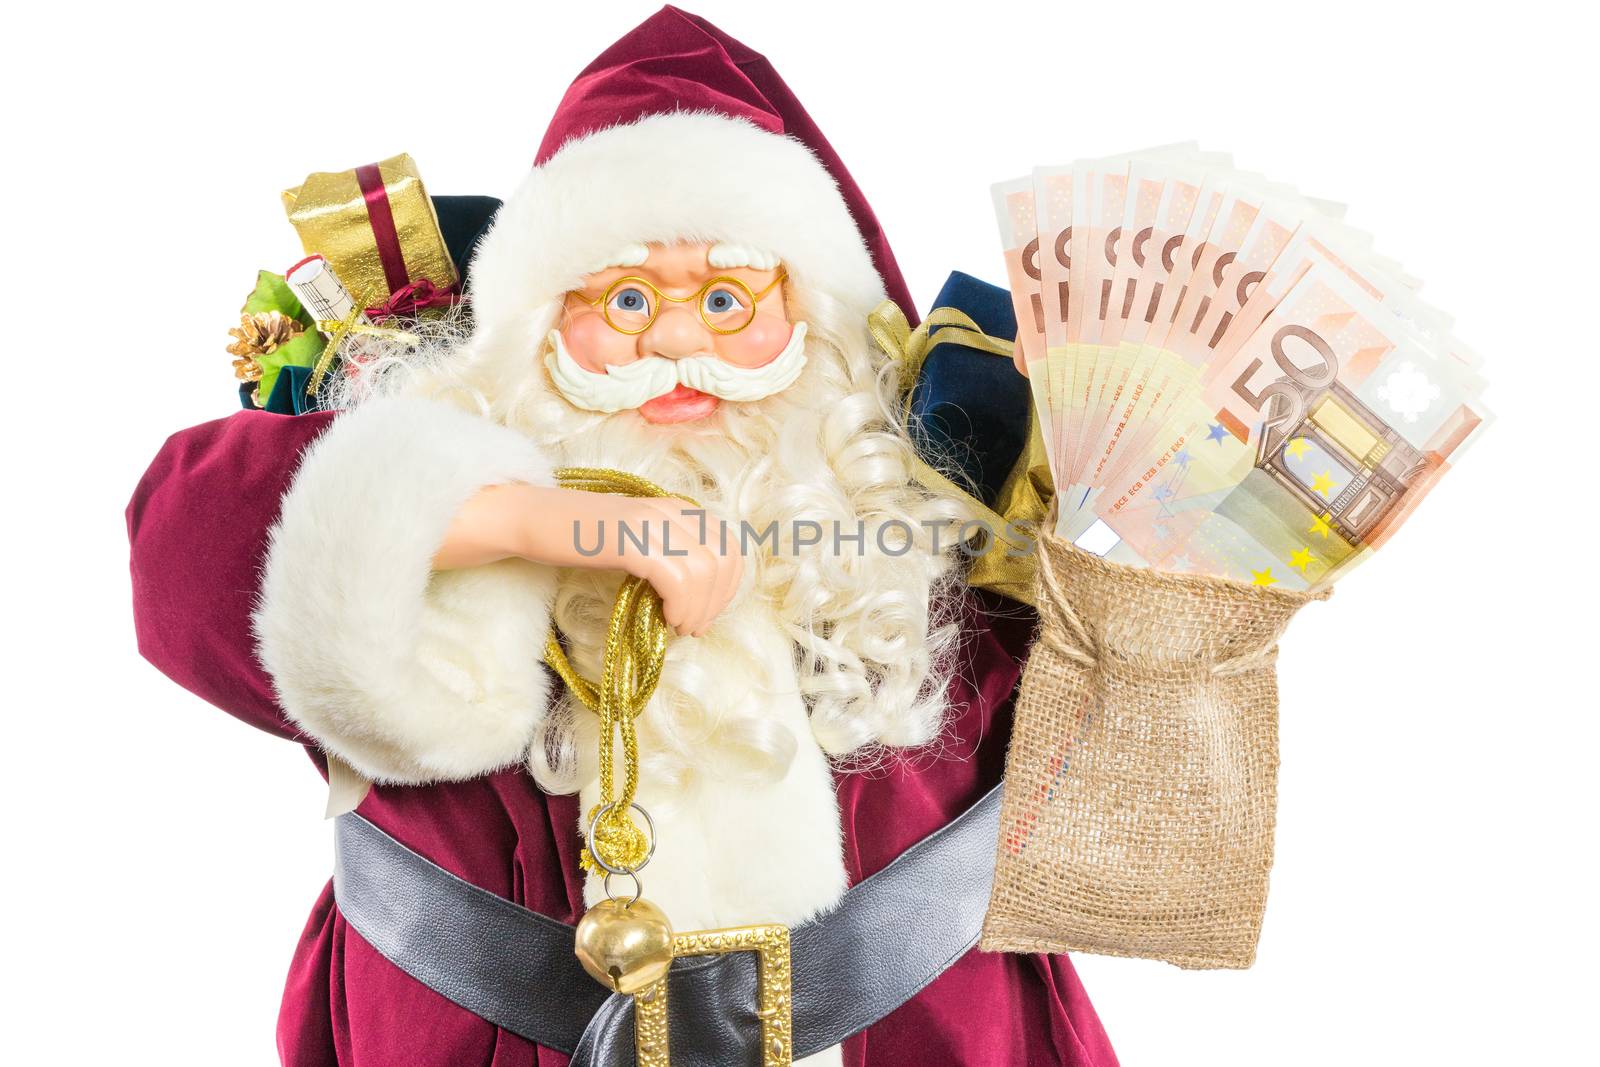 Model of Santa Claus with ringing bell gifts and money by BenSchonewille